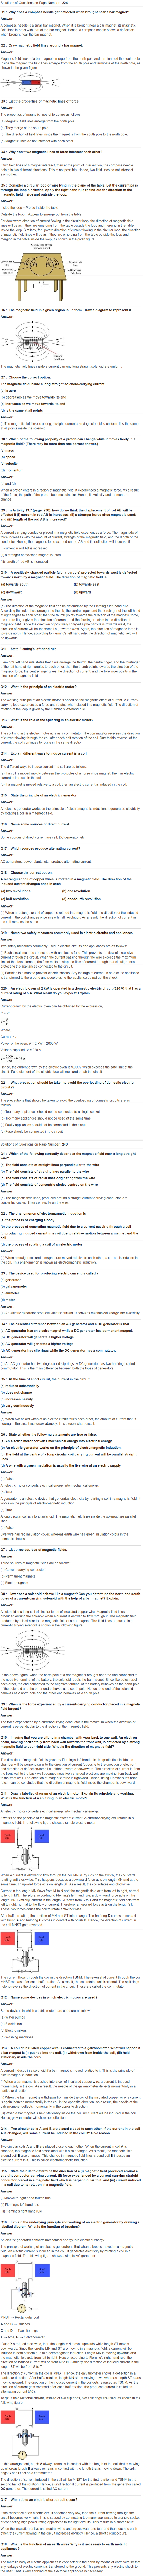 NCERT Solutions for Class 10 Science Chapter 13